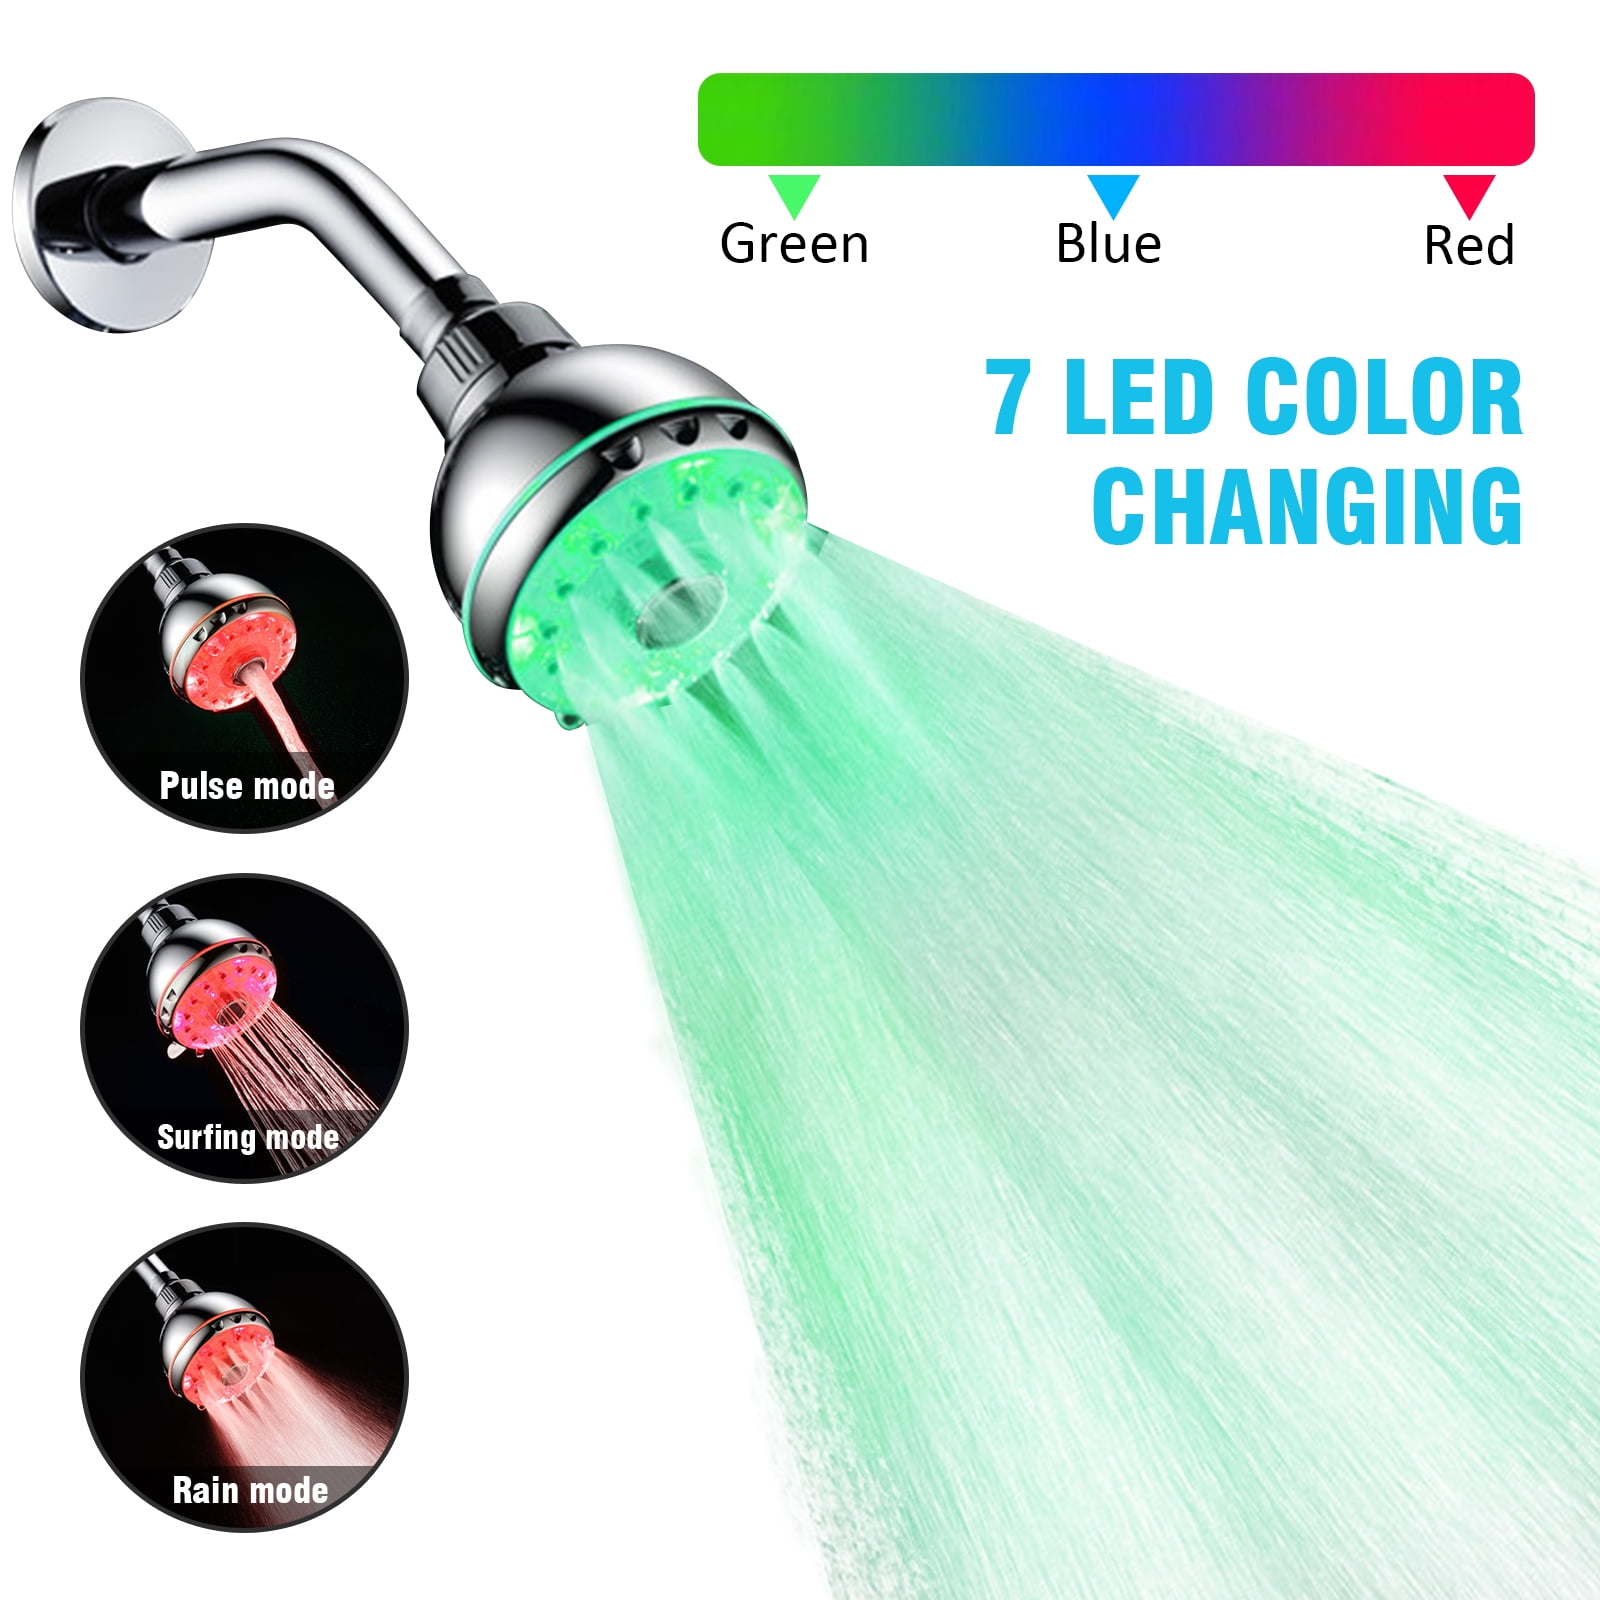 LED Shower Head 7 Colors Temperature Controlled Rainfall Top Spray Shower Head 